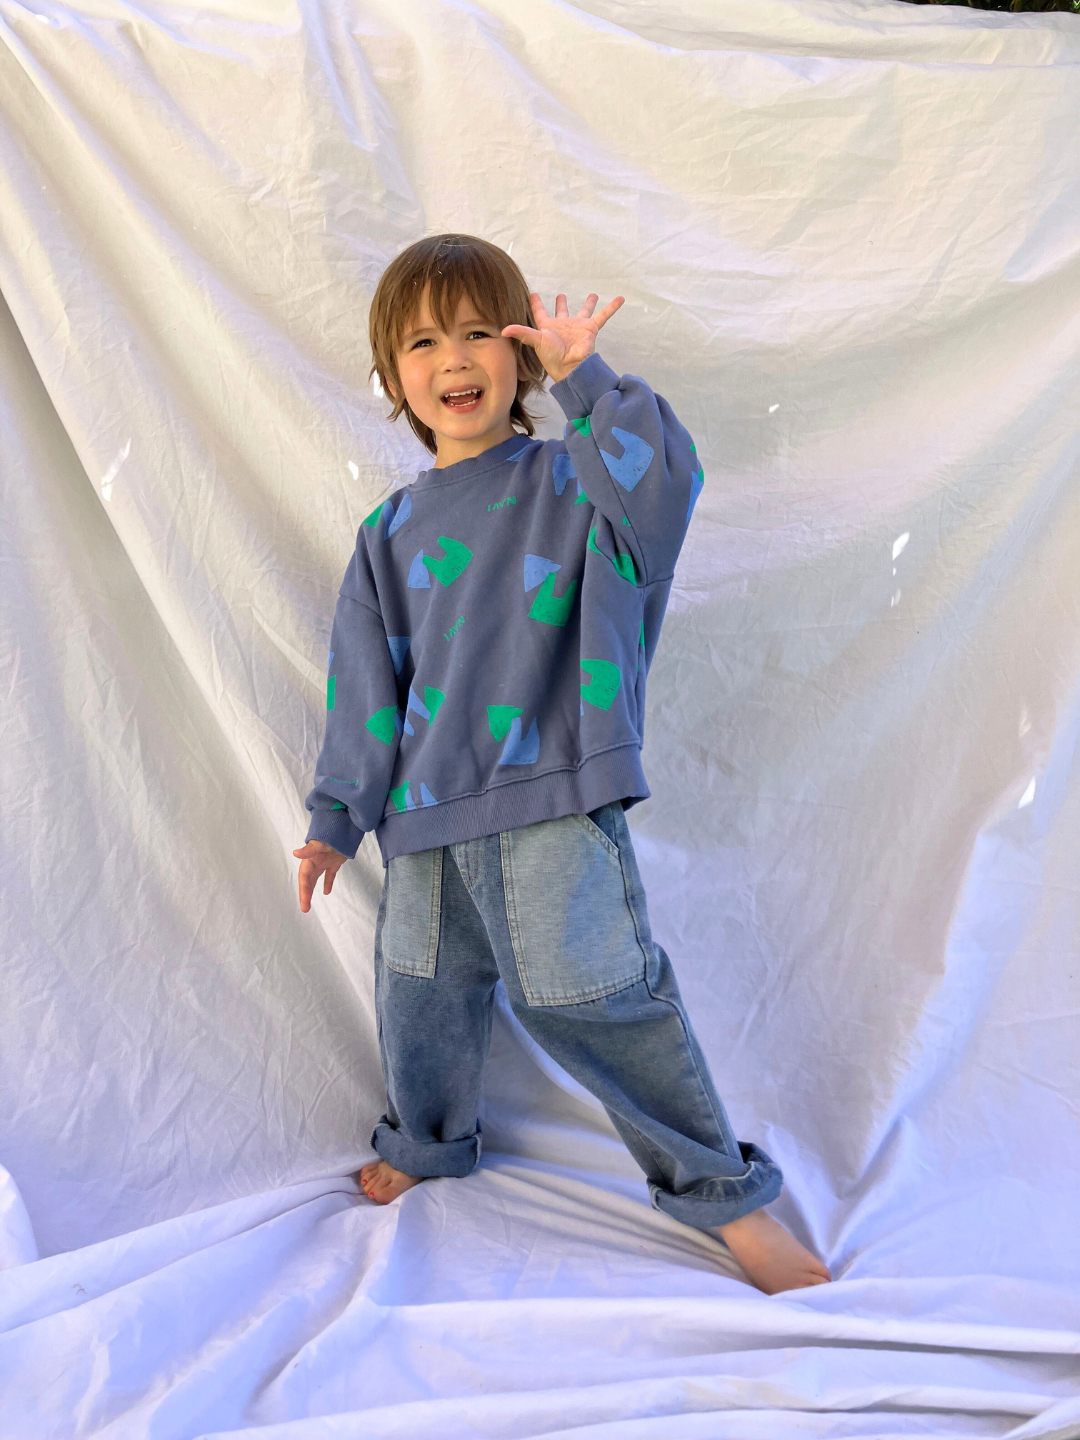 Child wearing the kids Duo Sweatshirt in faded blue printed with green and blue shapes and the word Navi. He is smiling and waving one hand, and wearing baggy blue jeans, and standing on a white sheet backdrop.